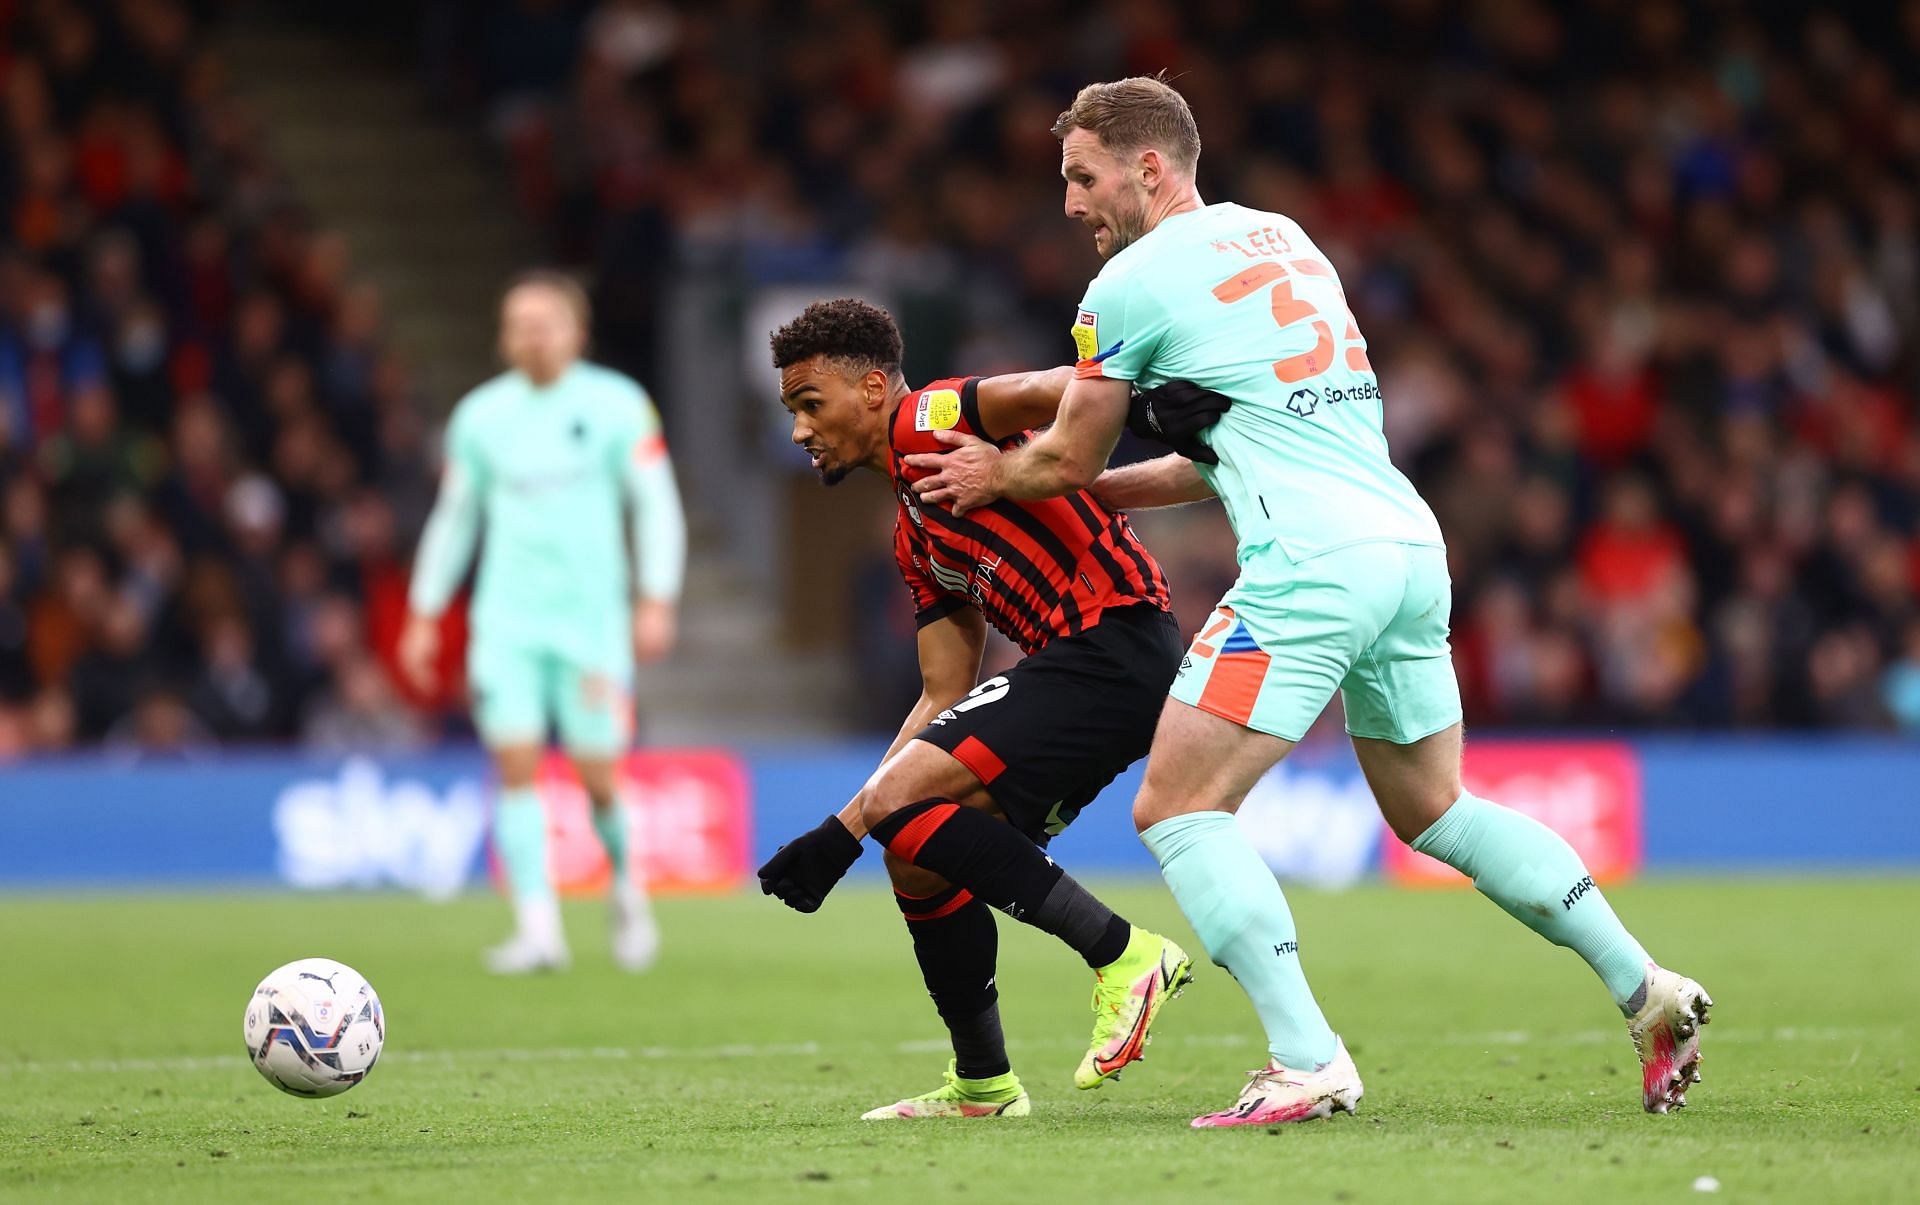 Stanislas will be a huge miss for Bournemouth